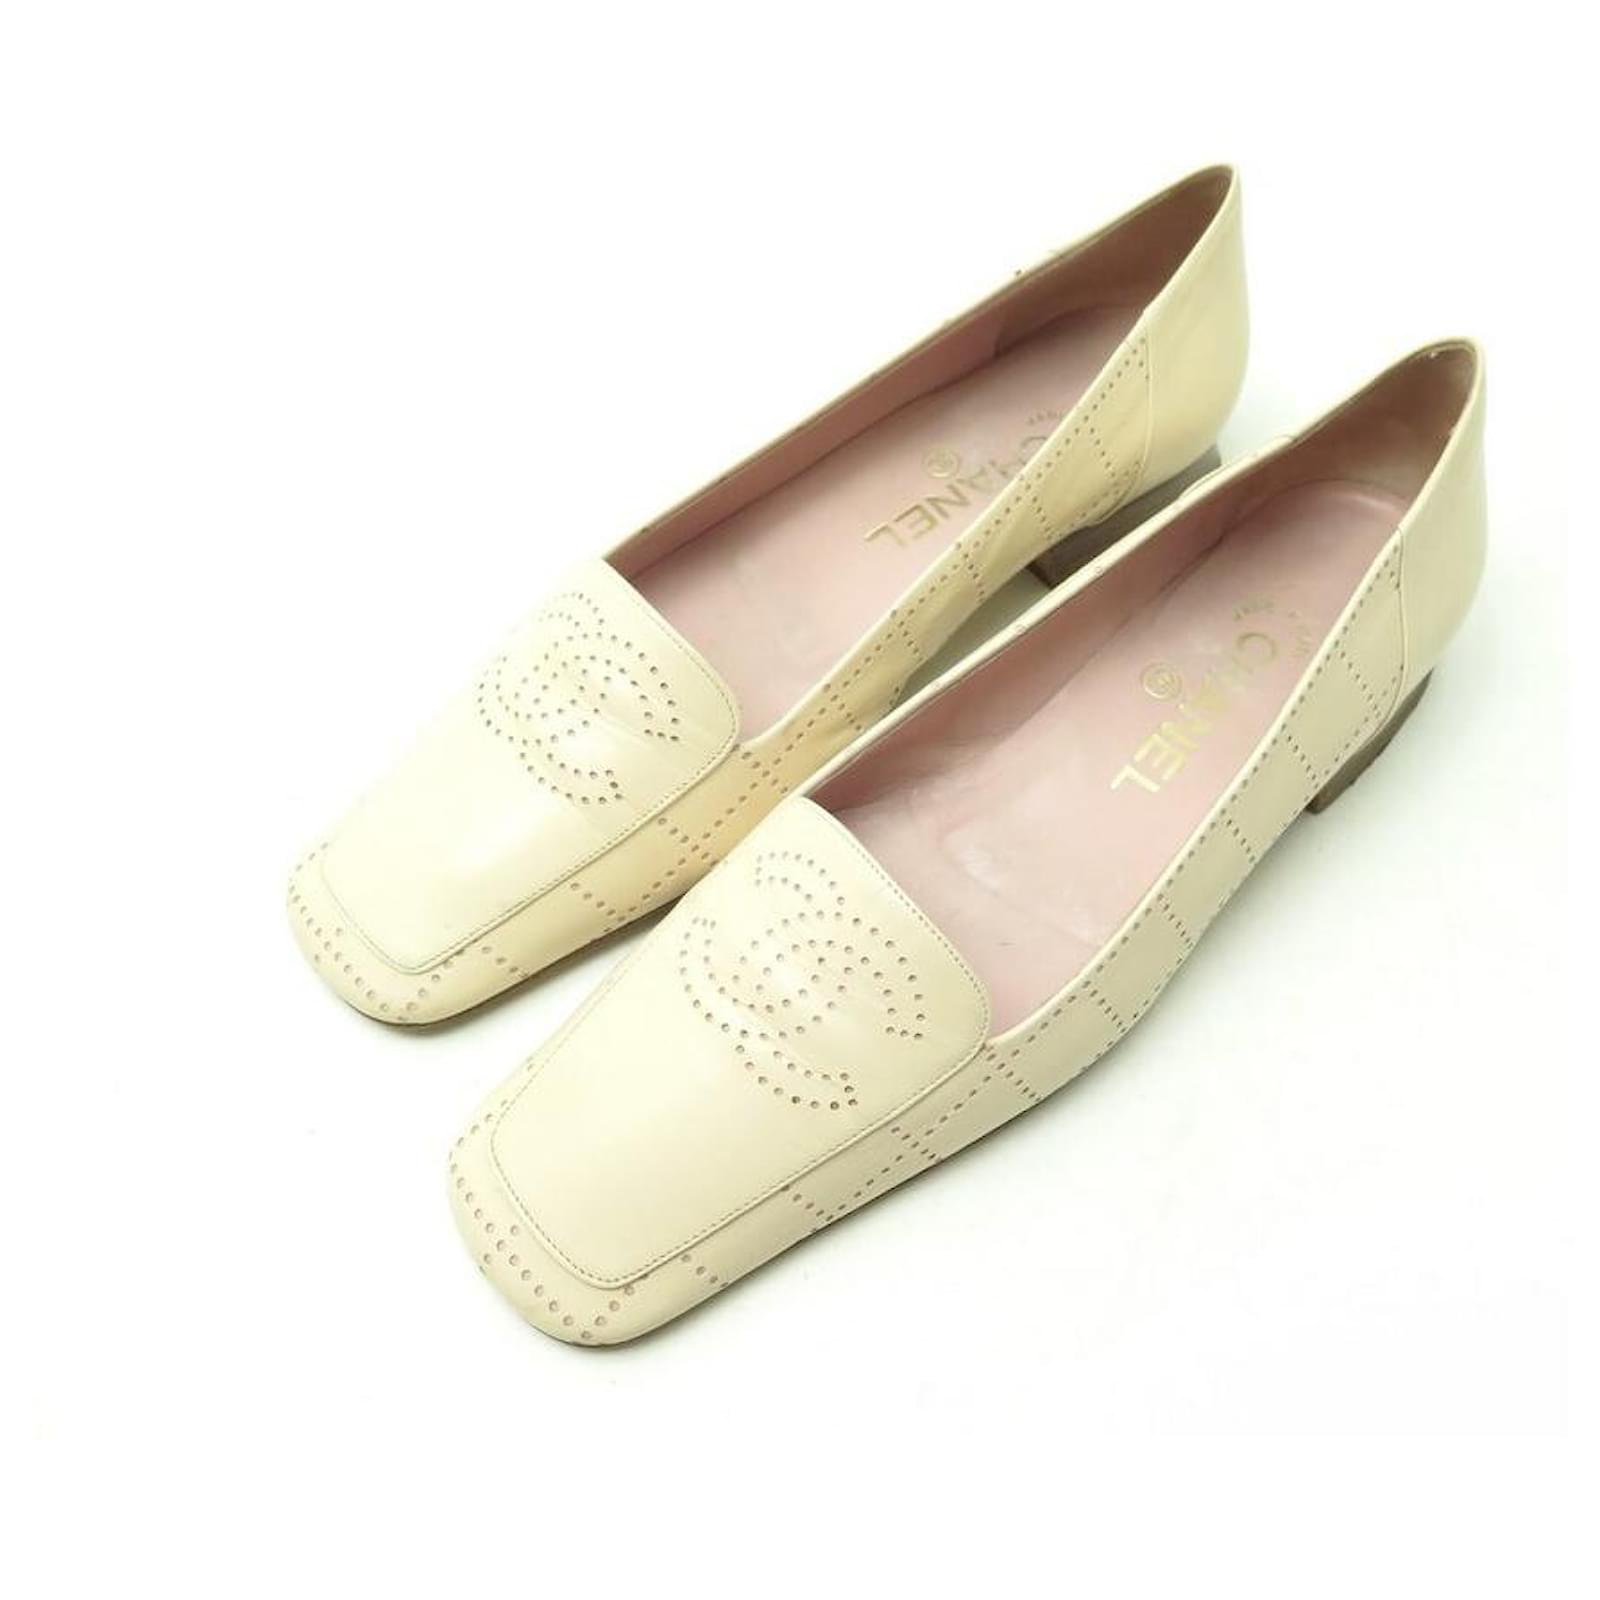 VINTAGE SHOES CHANEL LOAFERS CC LOGO 38 OLD PINK PERFORATED LEATHER SHOE